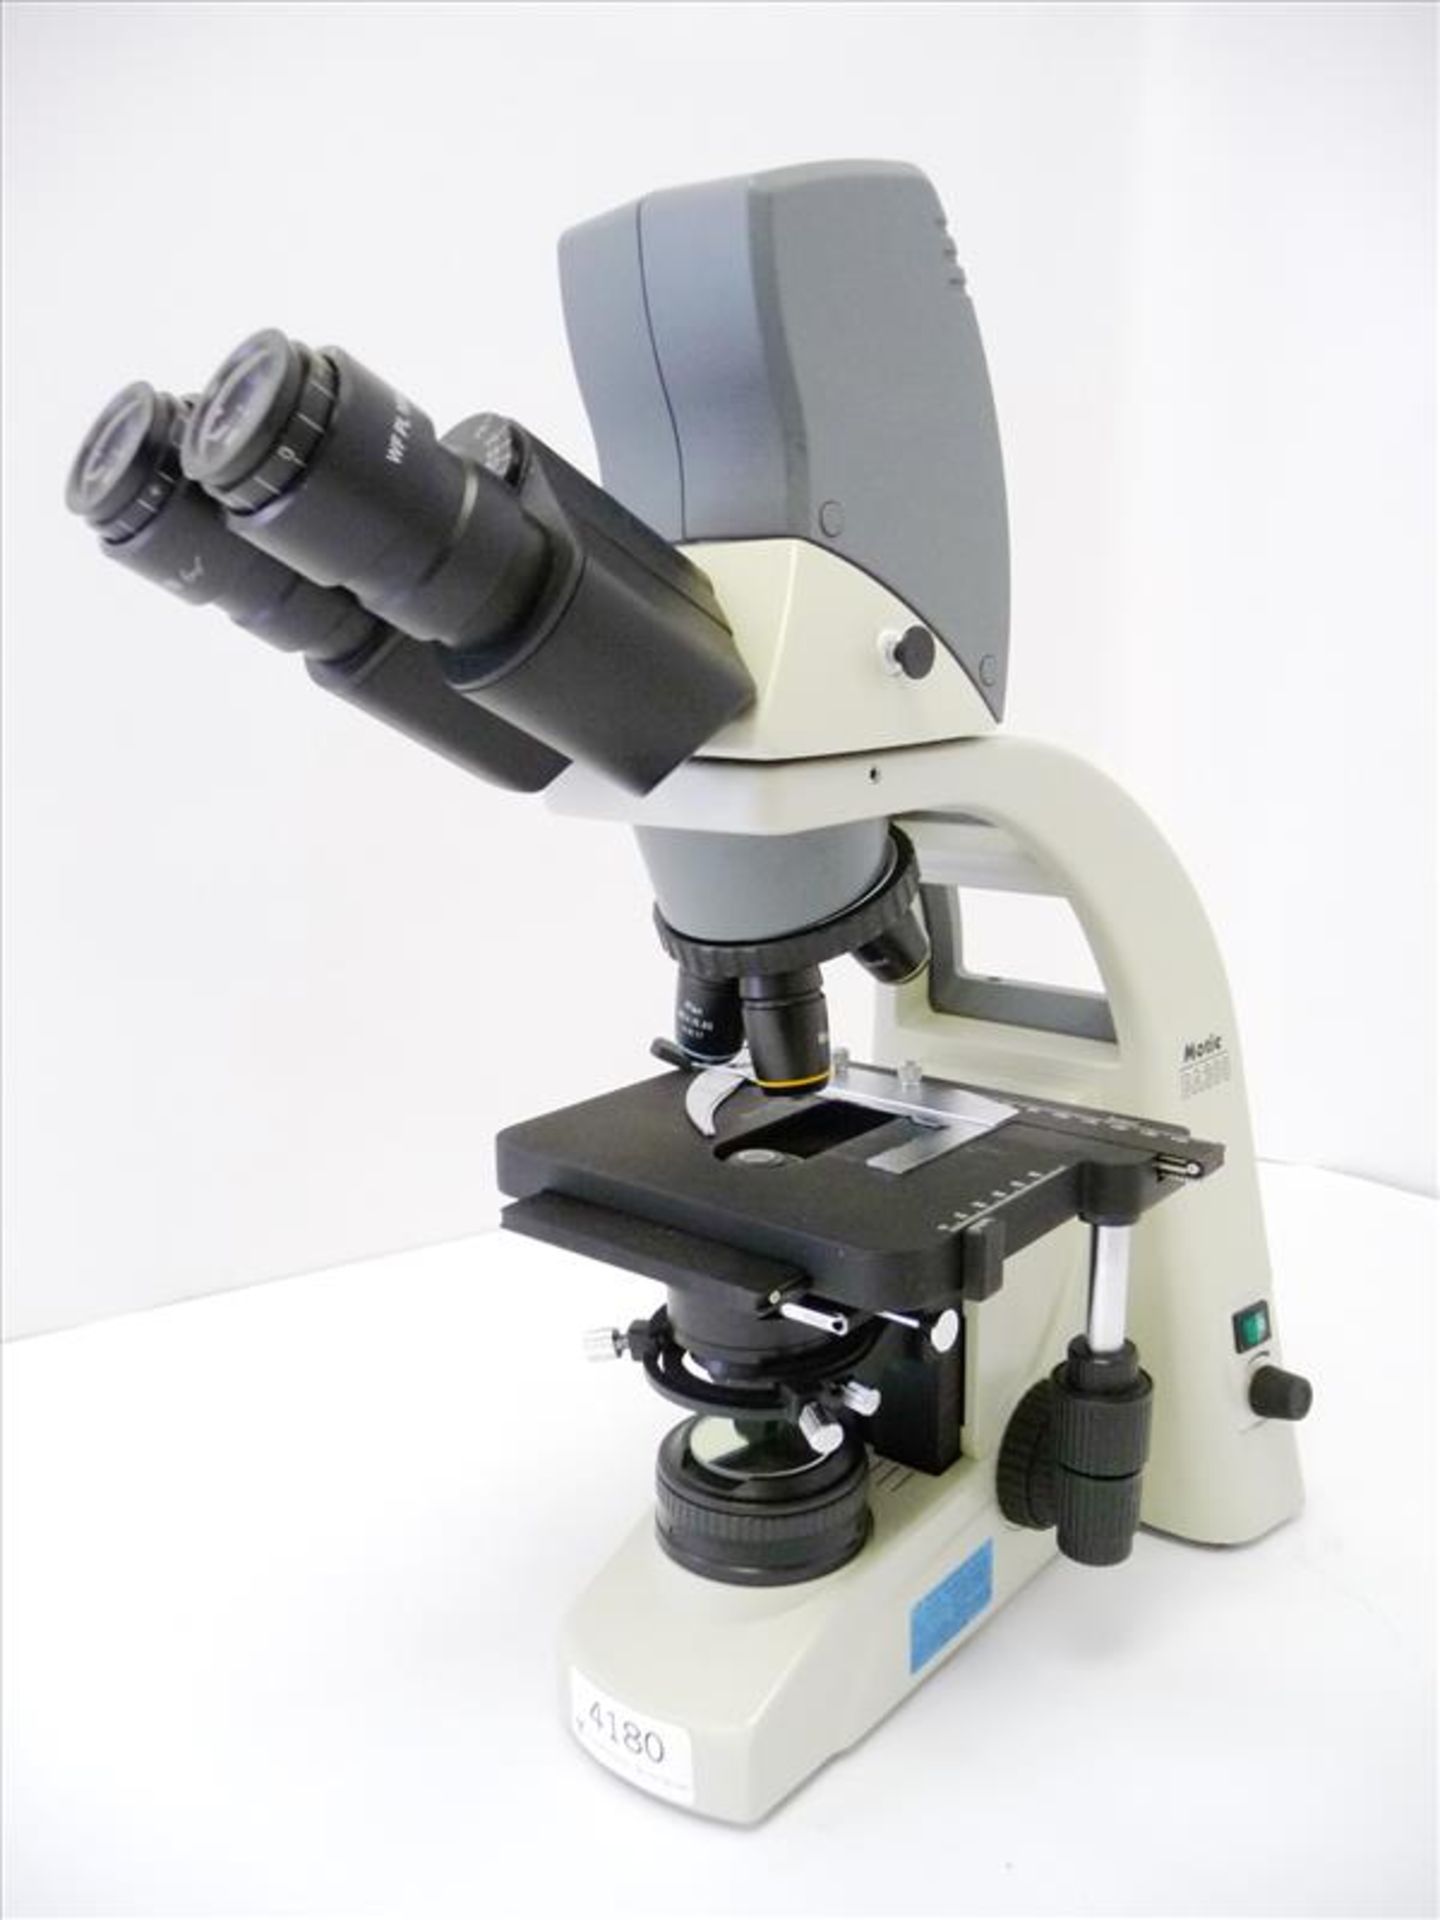 Motic DMBA300 CCIS Digital Laboratory Microscope c/w Motic Image Plus 2.0 software (located in North